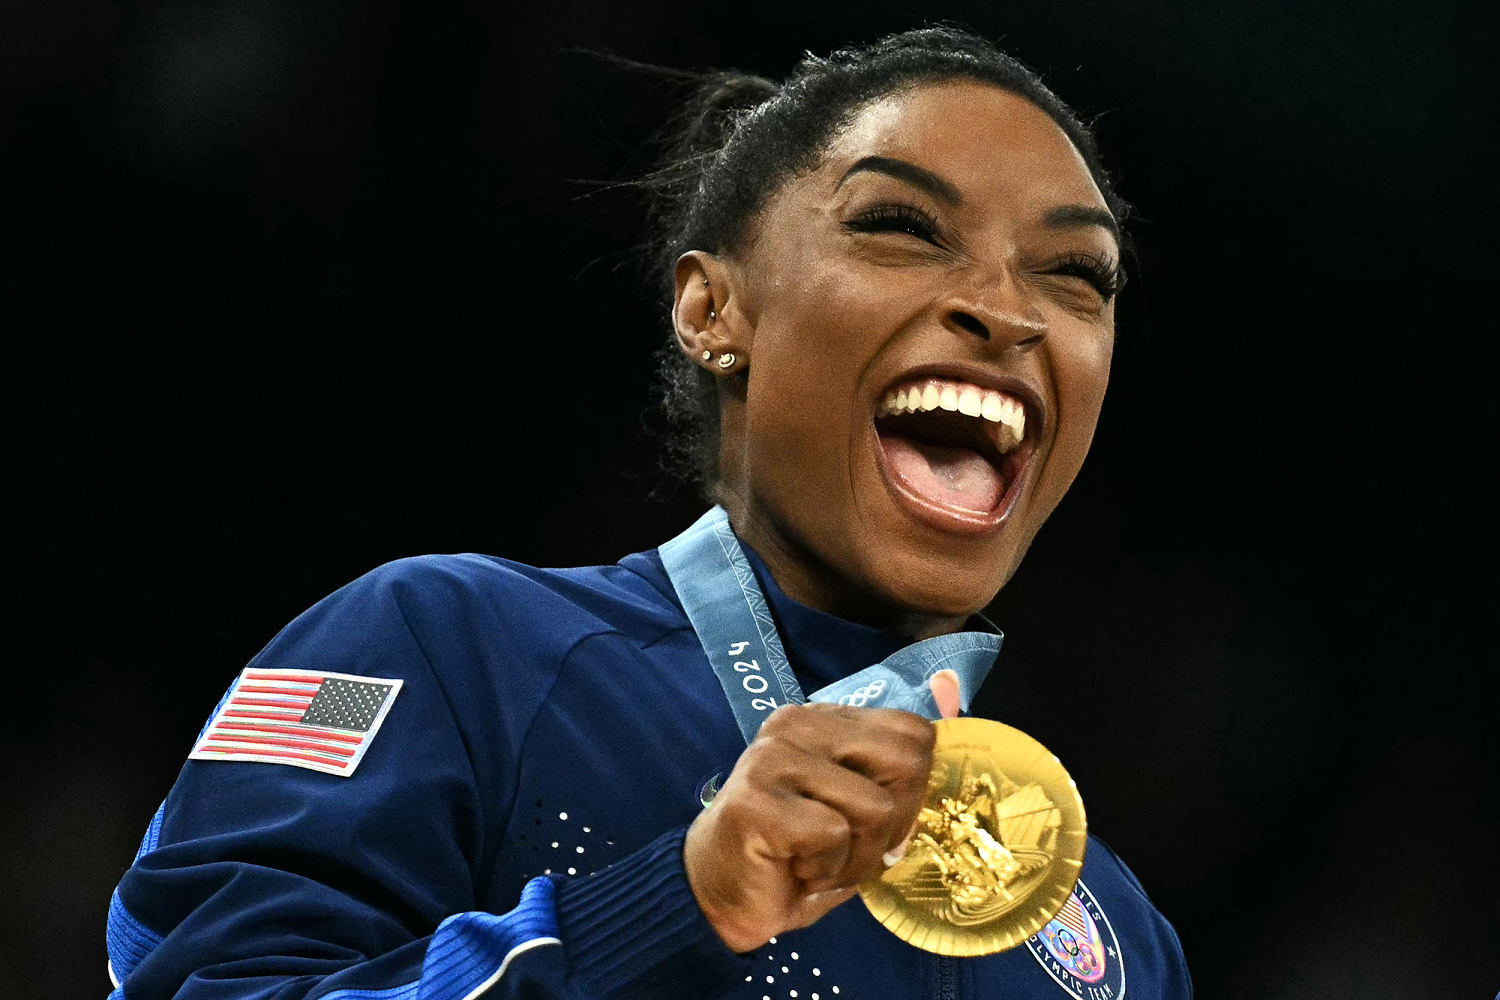 There’s athletic greatness — and then there’s Simone Biles